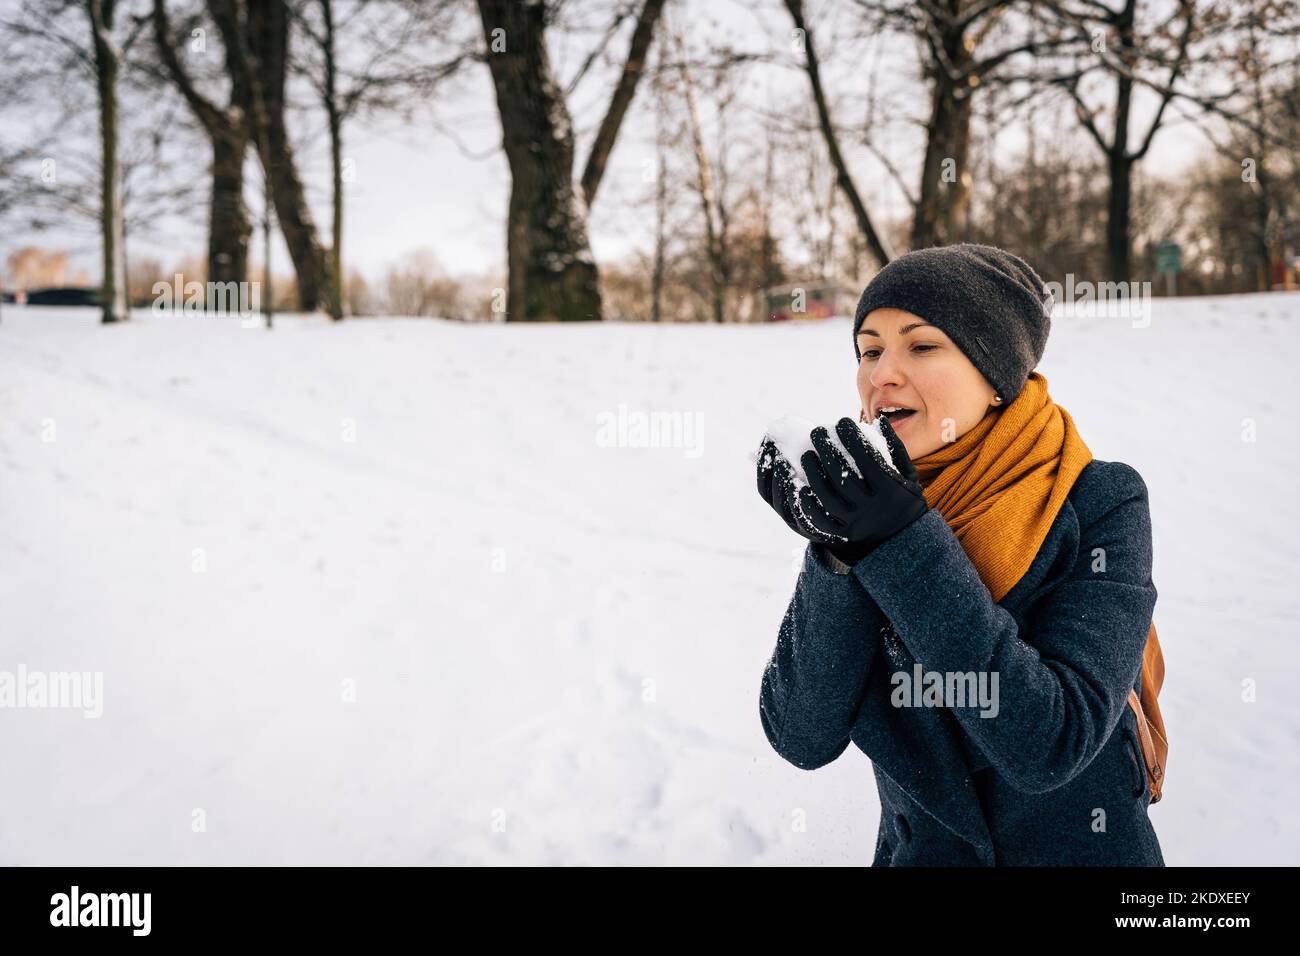 A woman blows snow off her palms in winter. Stock Photo